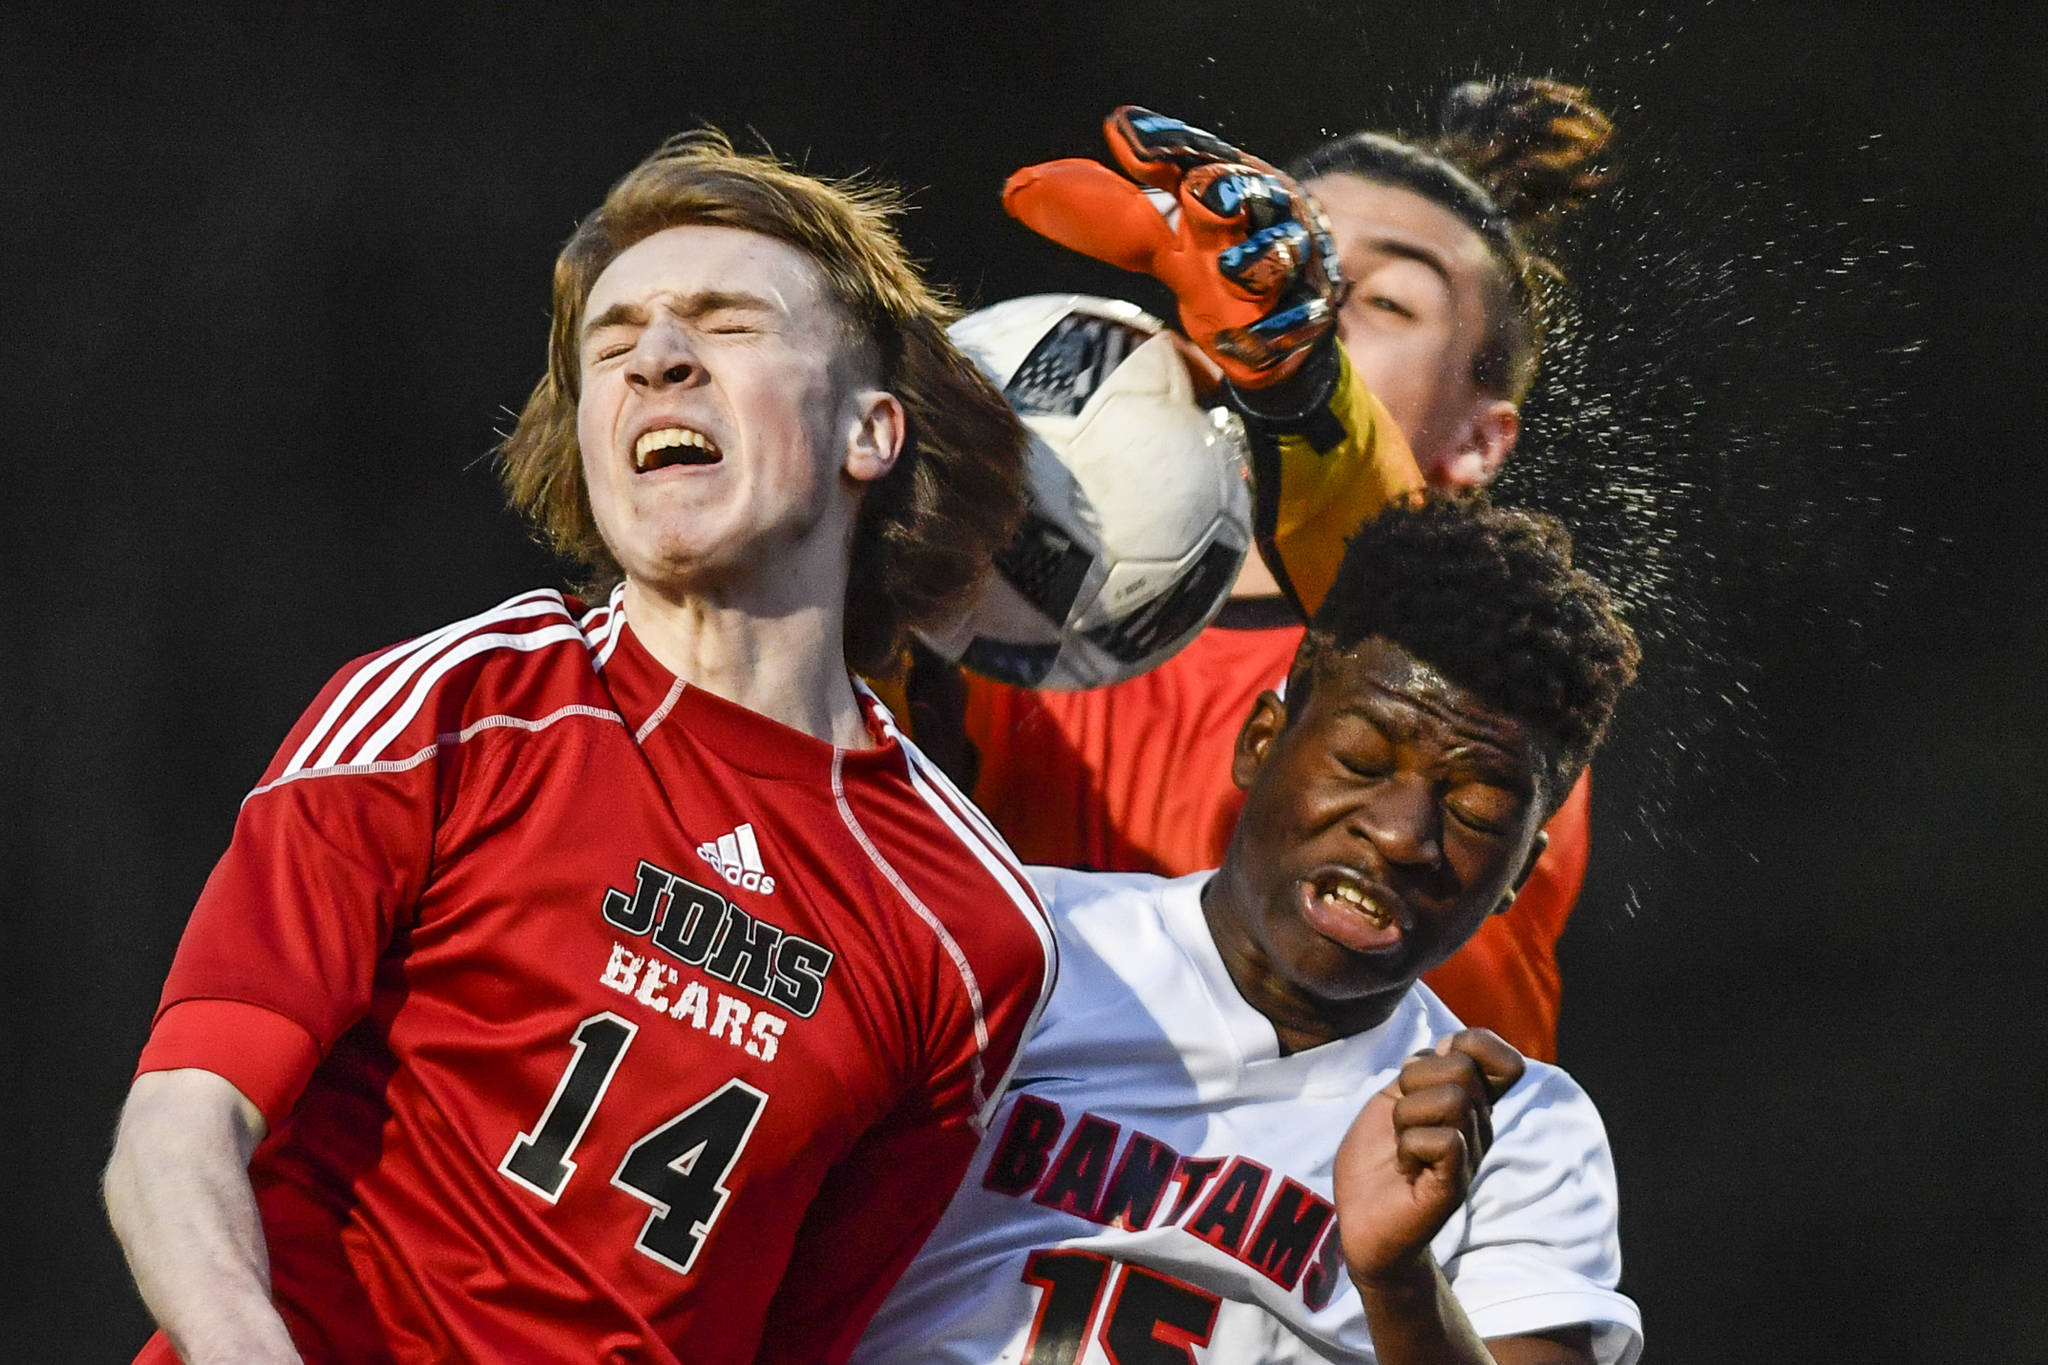 Opening night soccer: JDHS boys lose while girls coast to victory